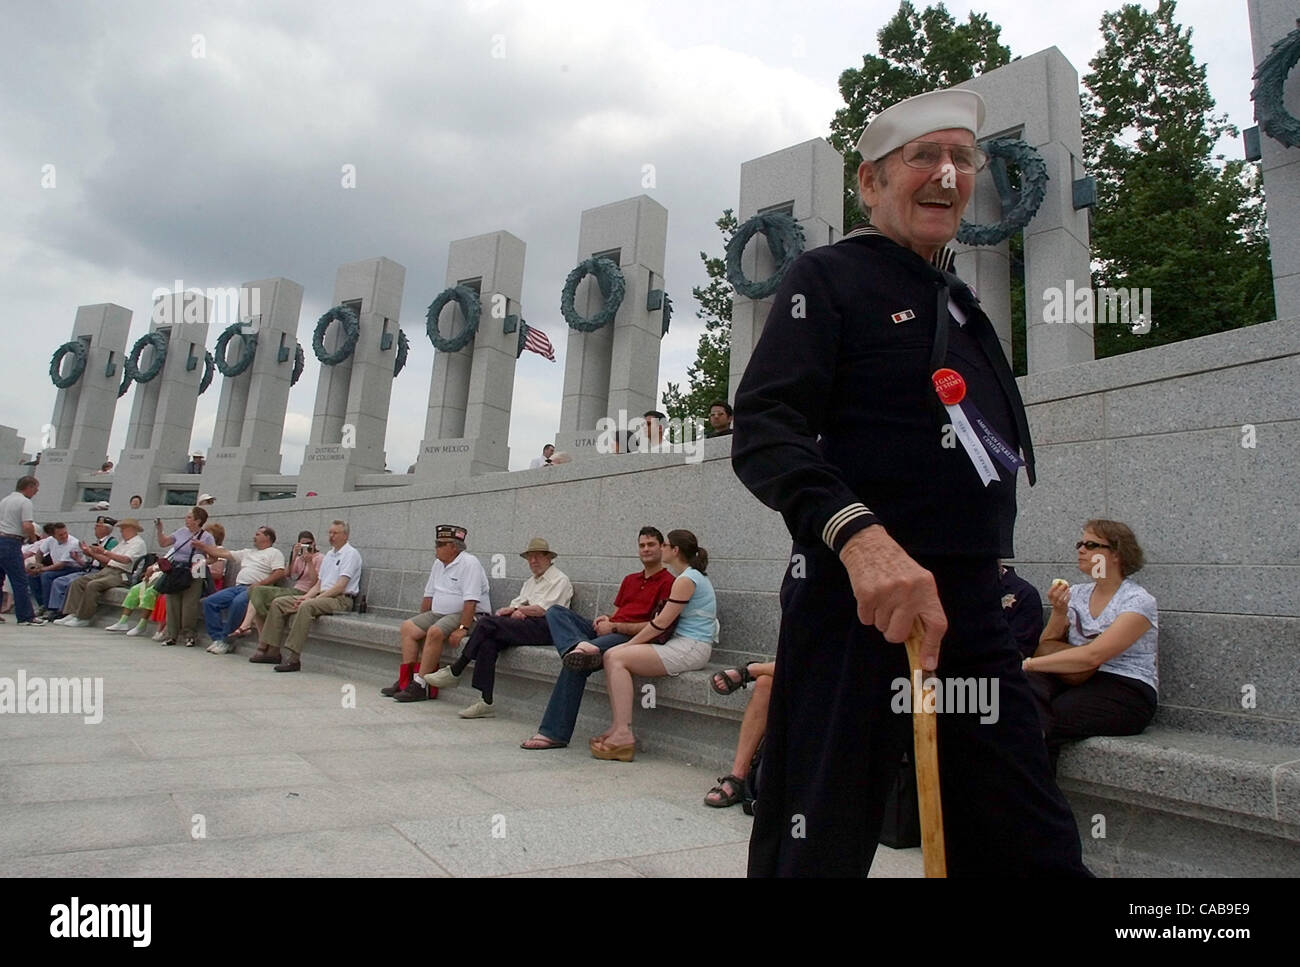 METRO - Andrew W. Nelson III, 78, wearing his original issue 1943 uniform, tours the World War II Monument Friday, May 28, 2004 in Washington D.C. Nelson, a Navy frogman, was charged with "killing as many enemies as possible" during his Pacific tour in World War II. The memorial will be officially d Stock Photo